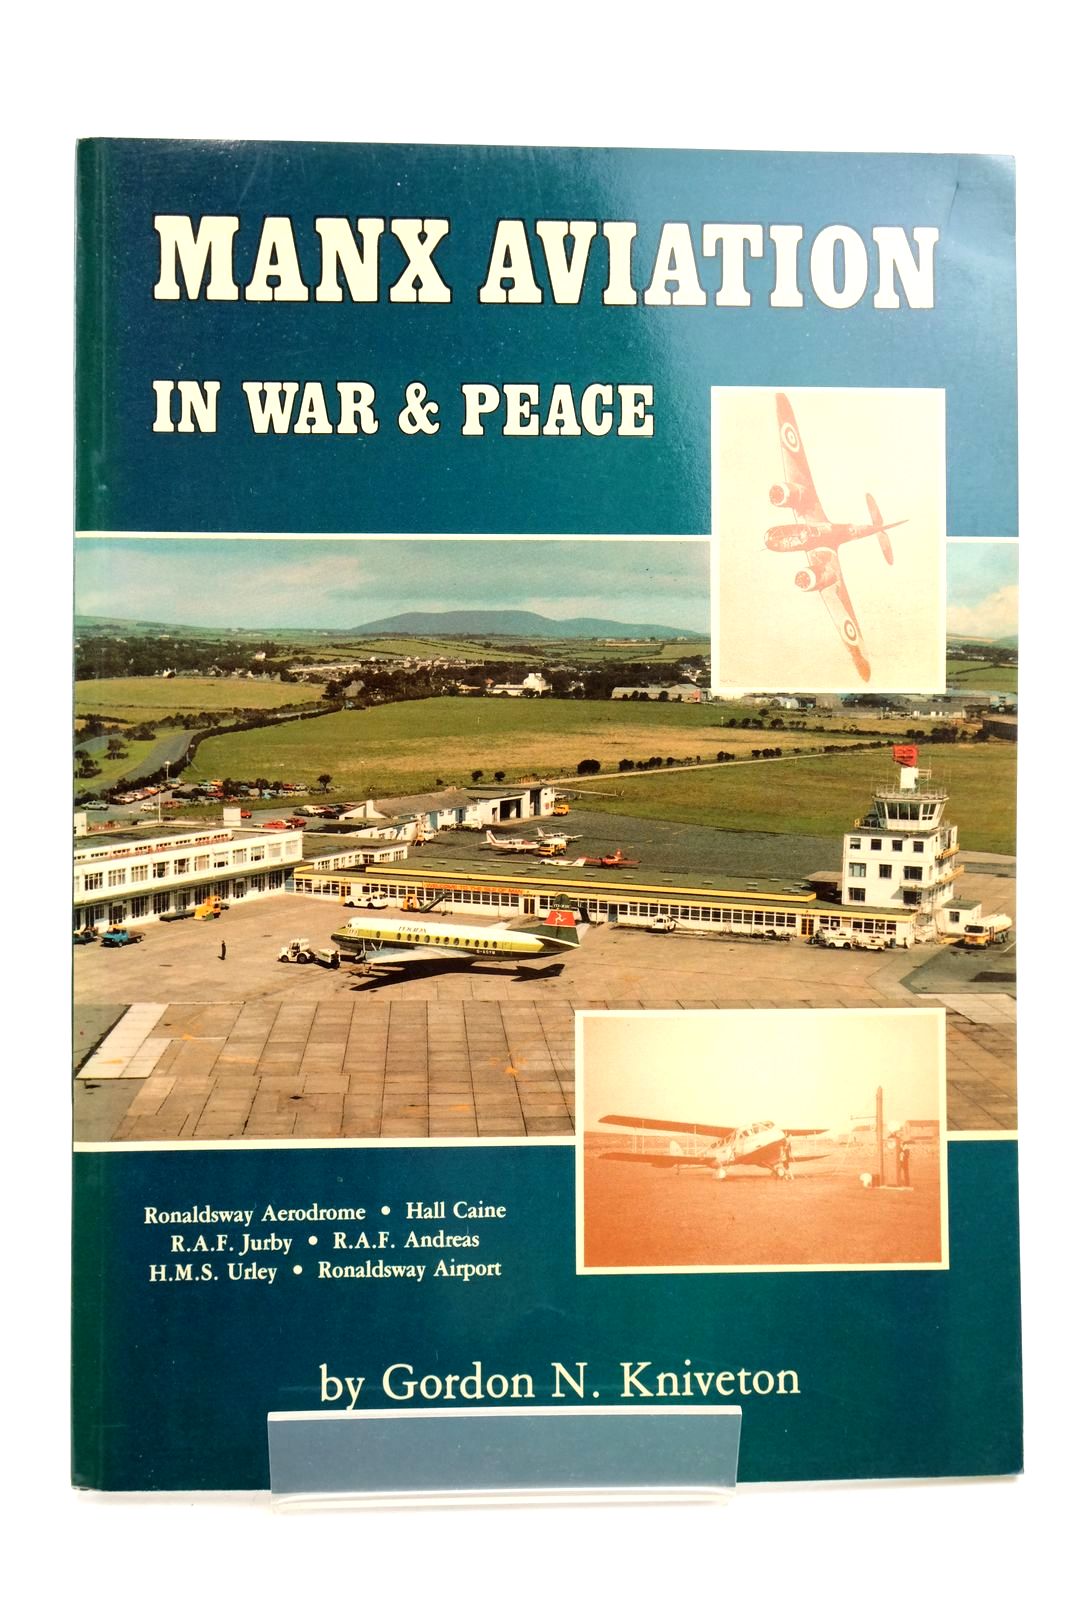 Photo of MANX AVIATION IN WAR & PEACE written by Kniveton, Gordon N. published by The Manx Experience (STOCK CODE: 2139186)  for sale by Stella & Rose's Books